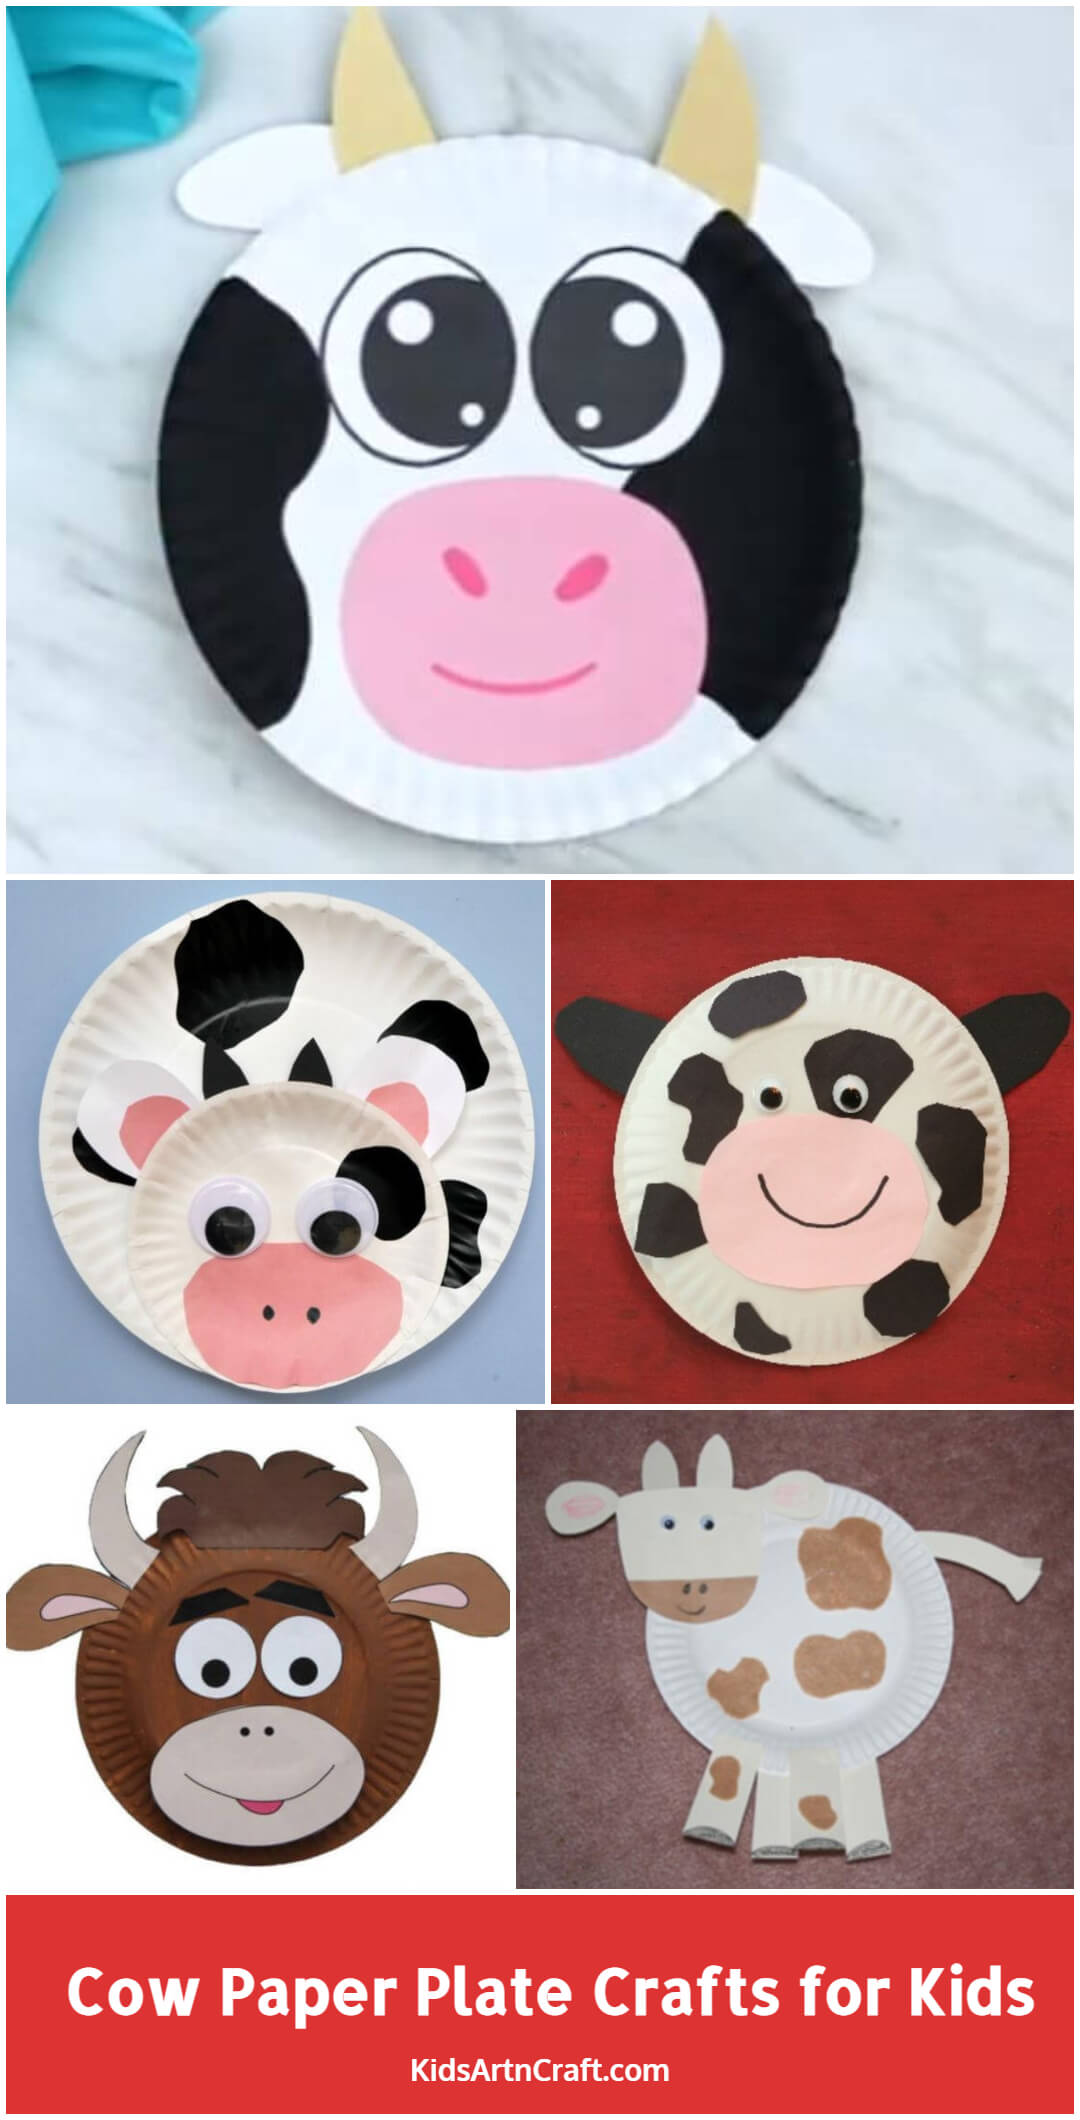  Cow Paper Plate Crafts for Kids